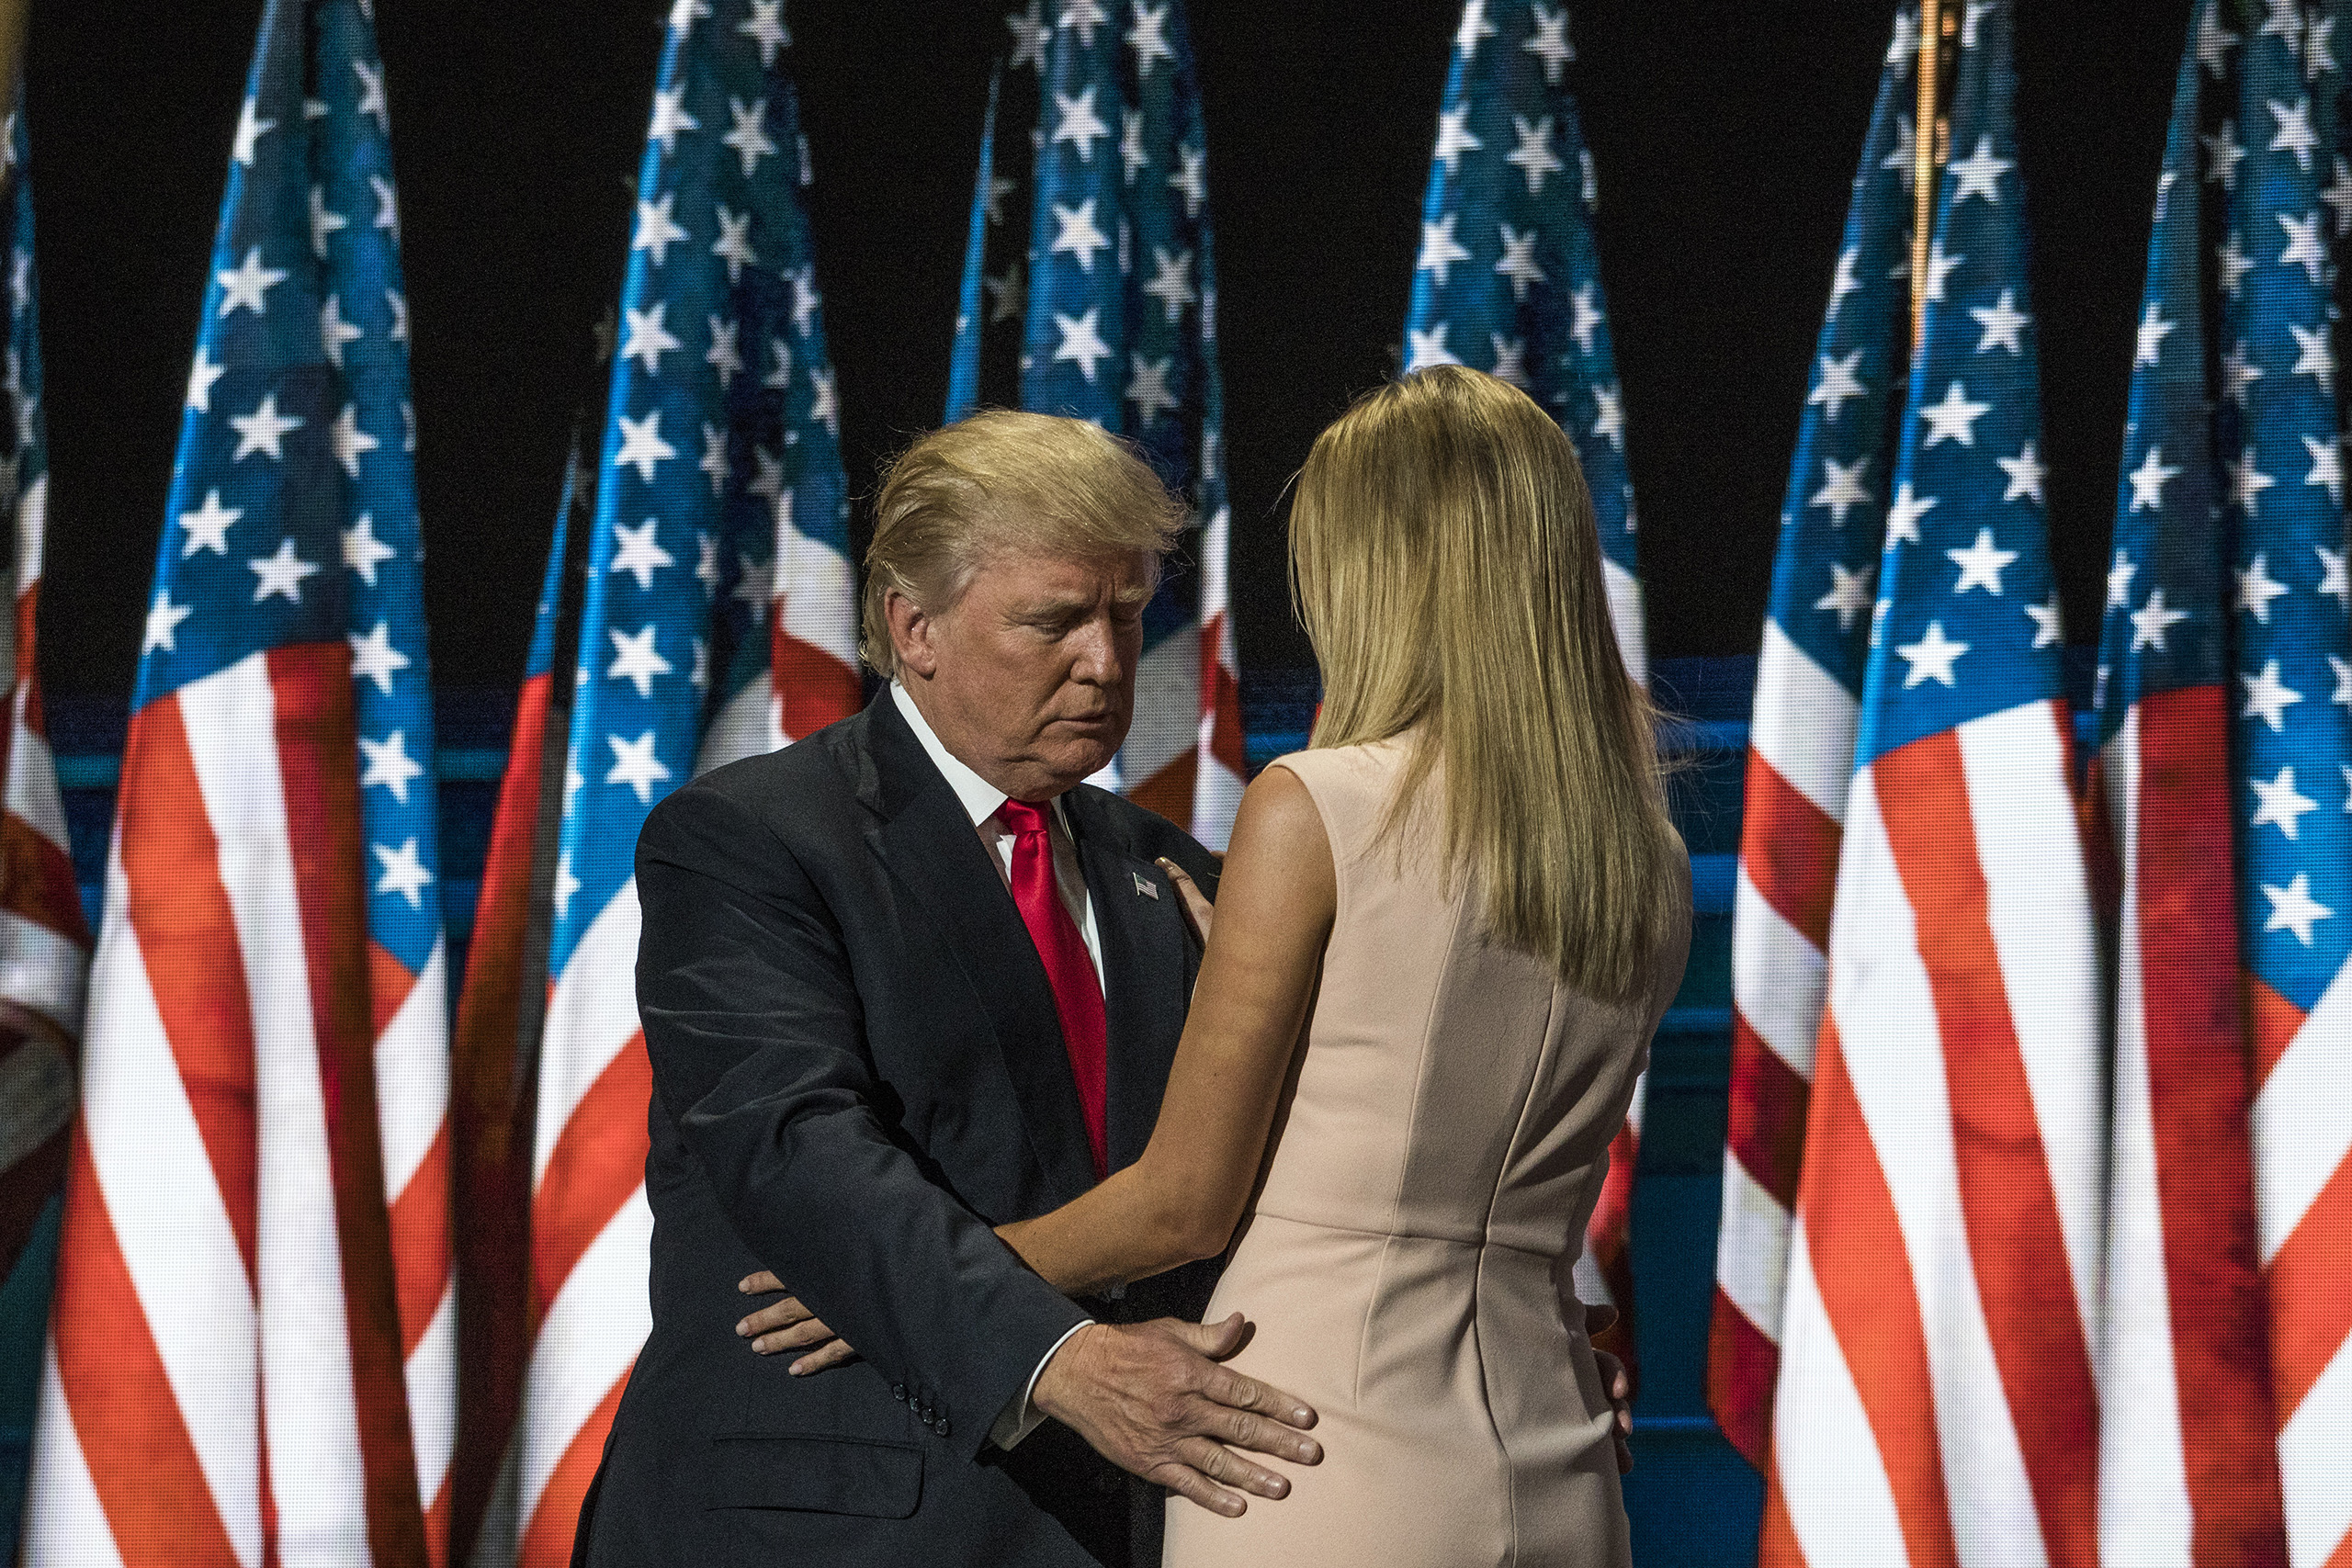 Donald Trump walks on stage after his daughter, Ivanka Trump, introduced him on the fourth day of the Republican National Convention at the Quicken Loans Arena in Cleveland, Ohio, on July 21, 2016.